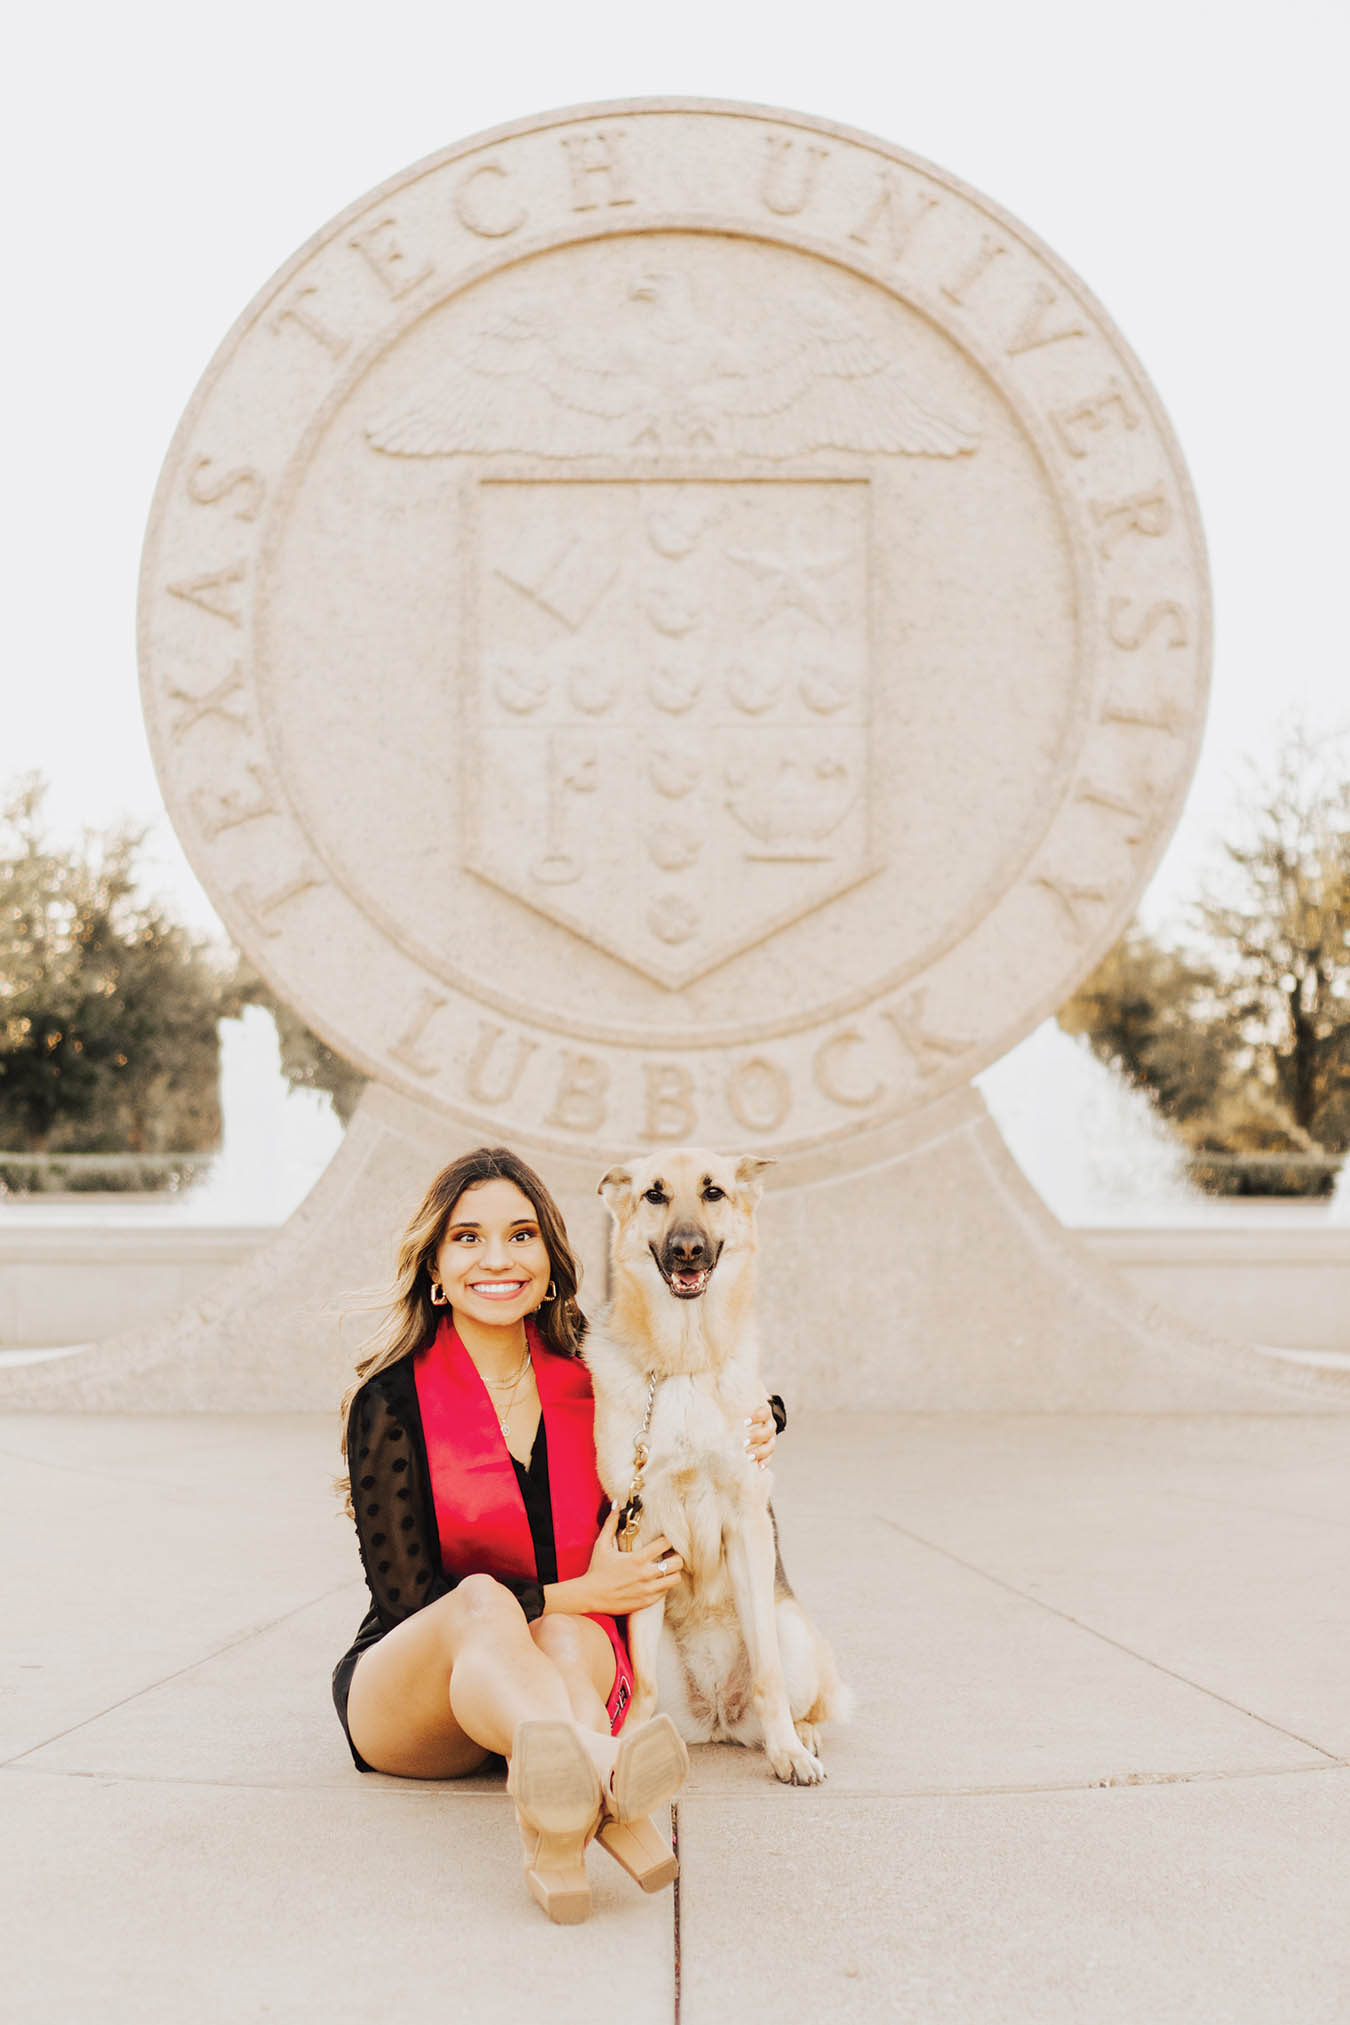 Alexie and Fancy at Texas Tech.